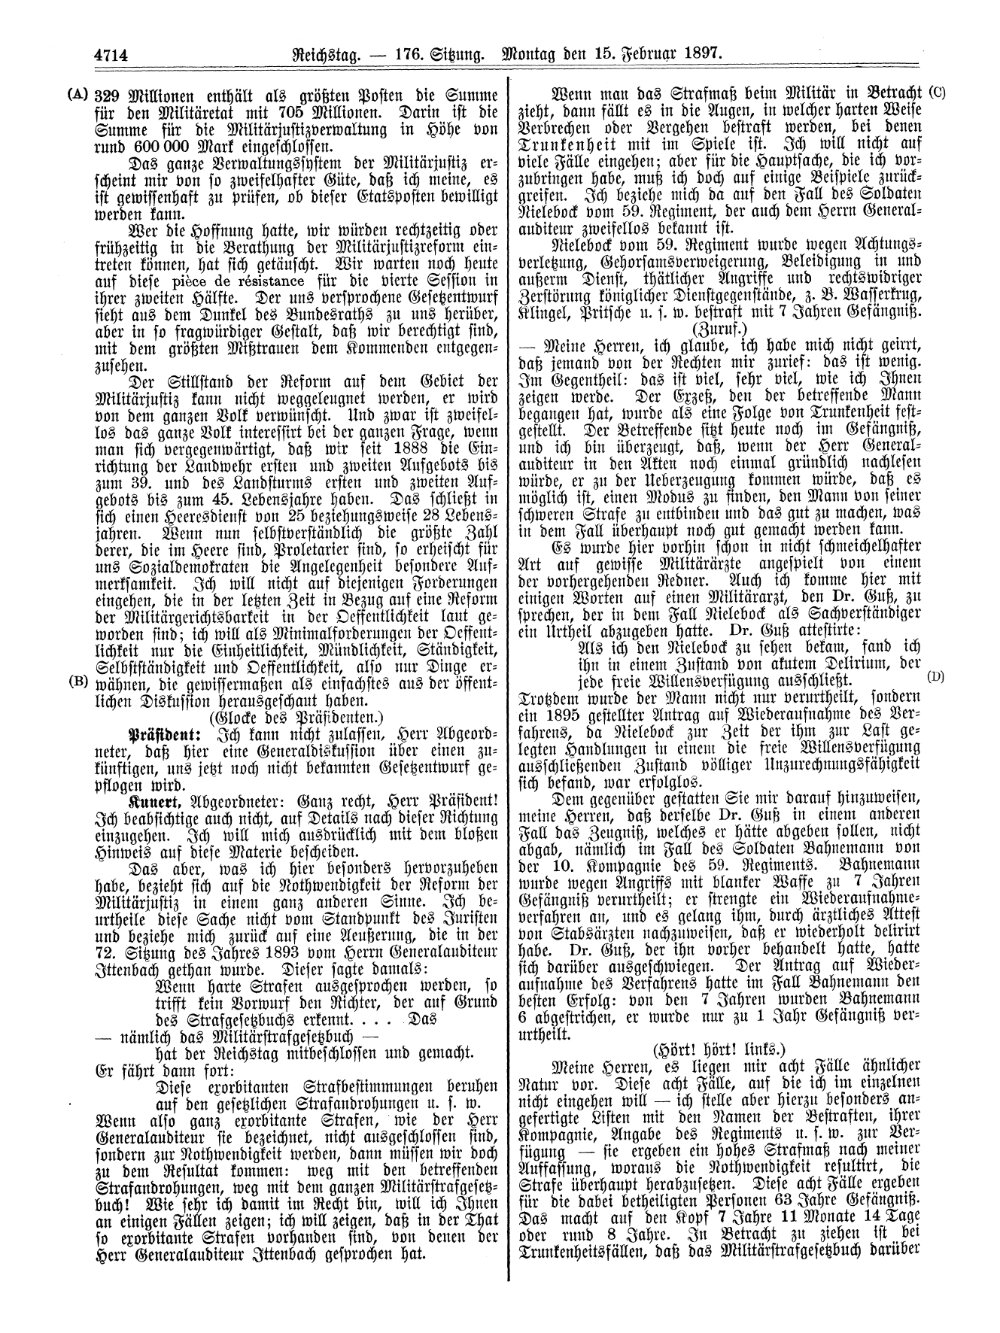 Scan of page 4714